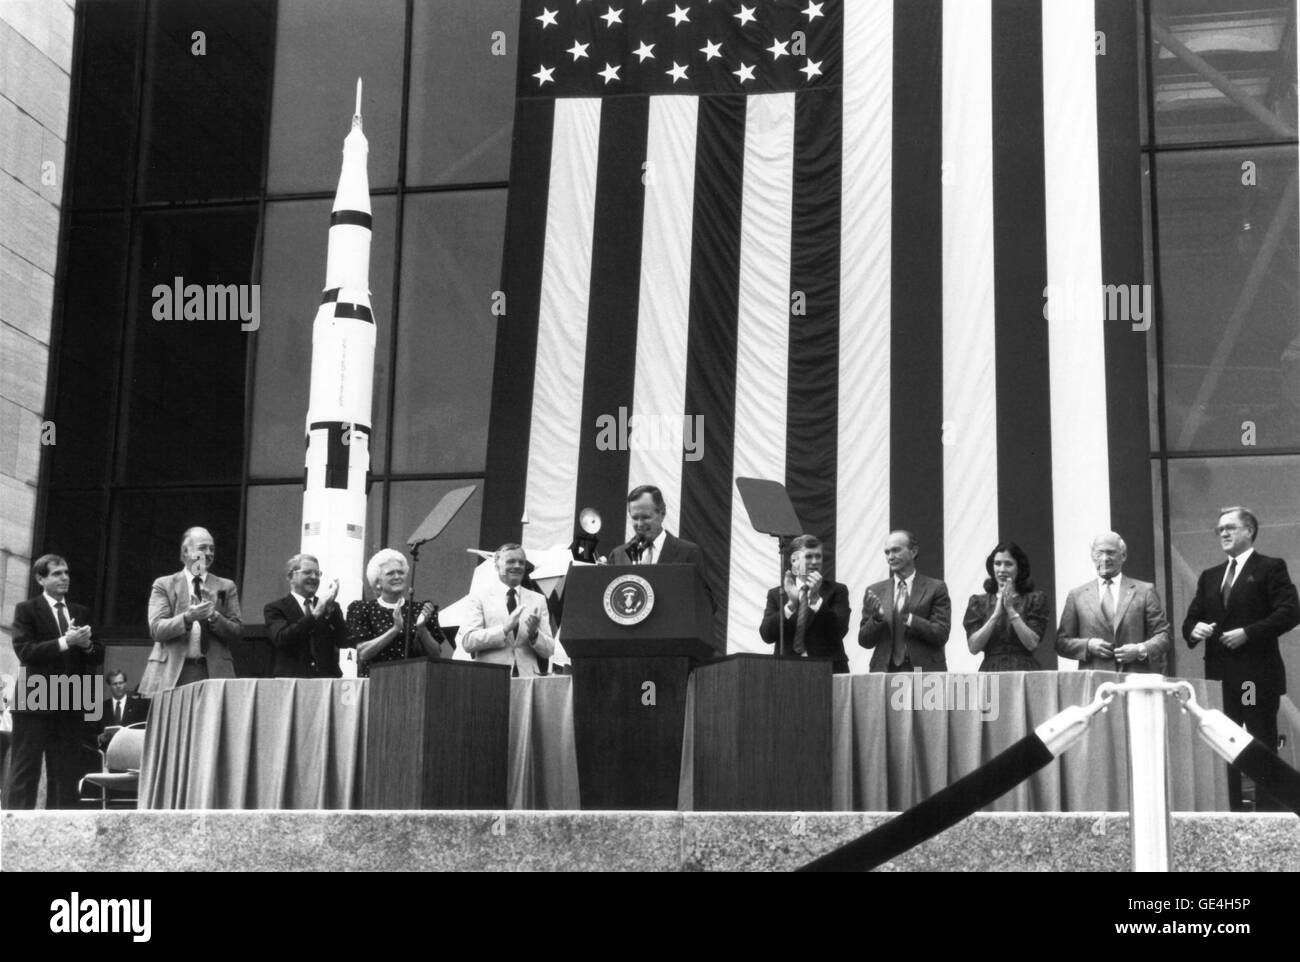 (July 20, 1989) President George Bush speaks at the National Air and Space Museum's 20th anniversary celebration of the Apollo 11 Moon landing. Here, on July 20, 1989, Bush announced his new Space Exploration Initiative, which was to complete the space station, return man to the moon, and bring man to Mars for the first time. The plan fell apart when NASA offered an estimated budget of 500 billion over the next 20 to 30 years to achieve the President's goal. Congress balked, and NASA returned to its earlier program of primarily robotic space exploration. From left to right are NASA Administrat Stock Photo